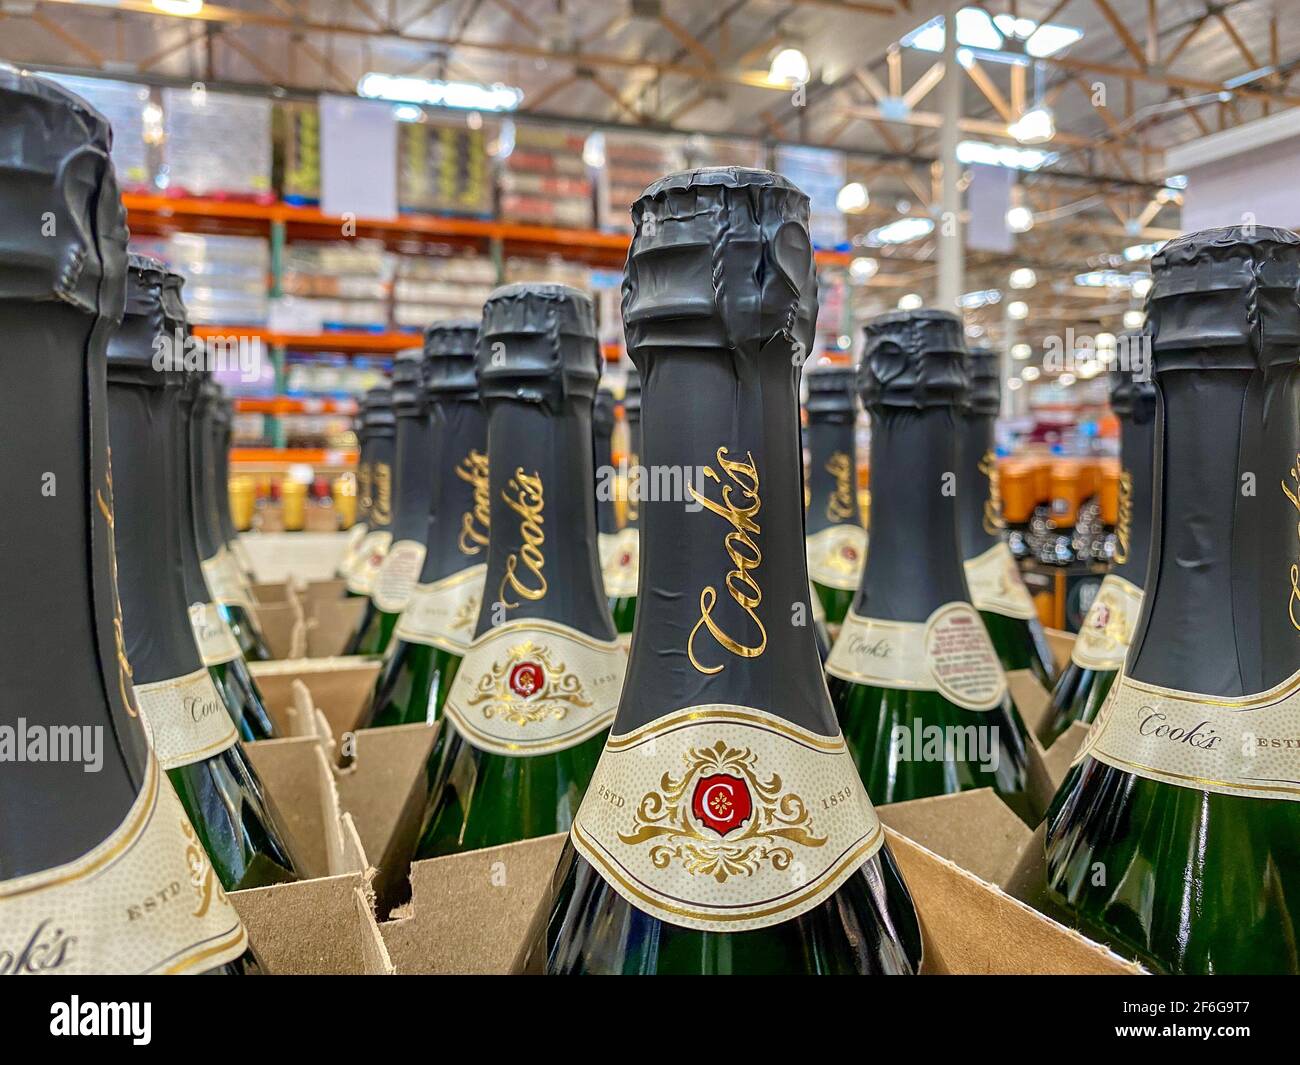 Bottles of Cook's Brut Sparkling wine champagne Stock Photo